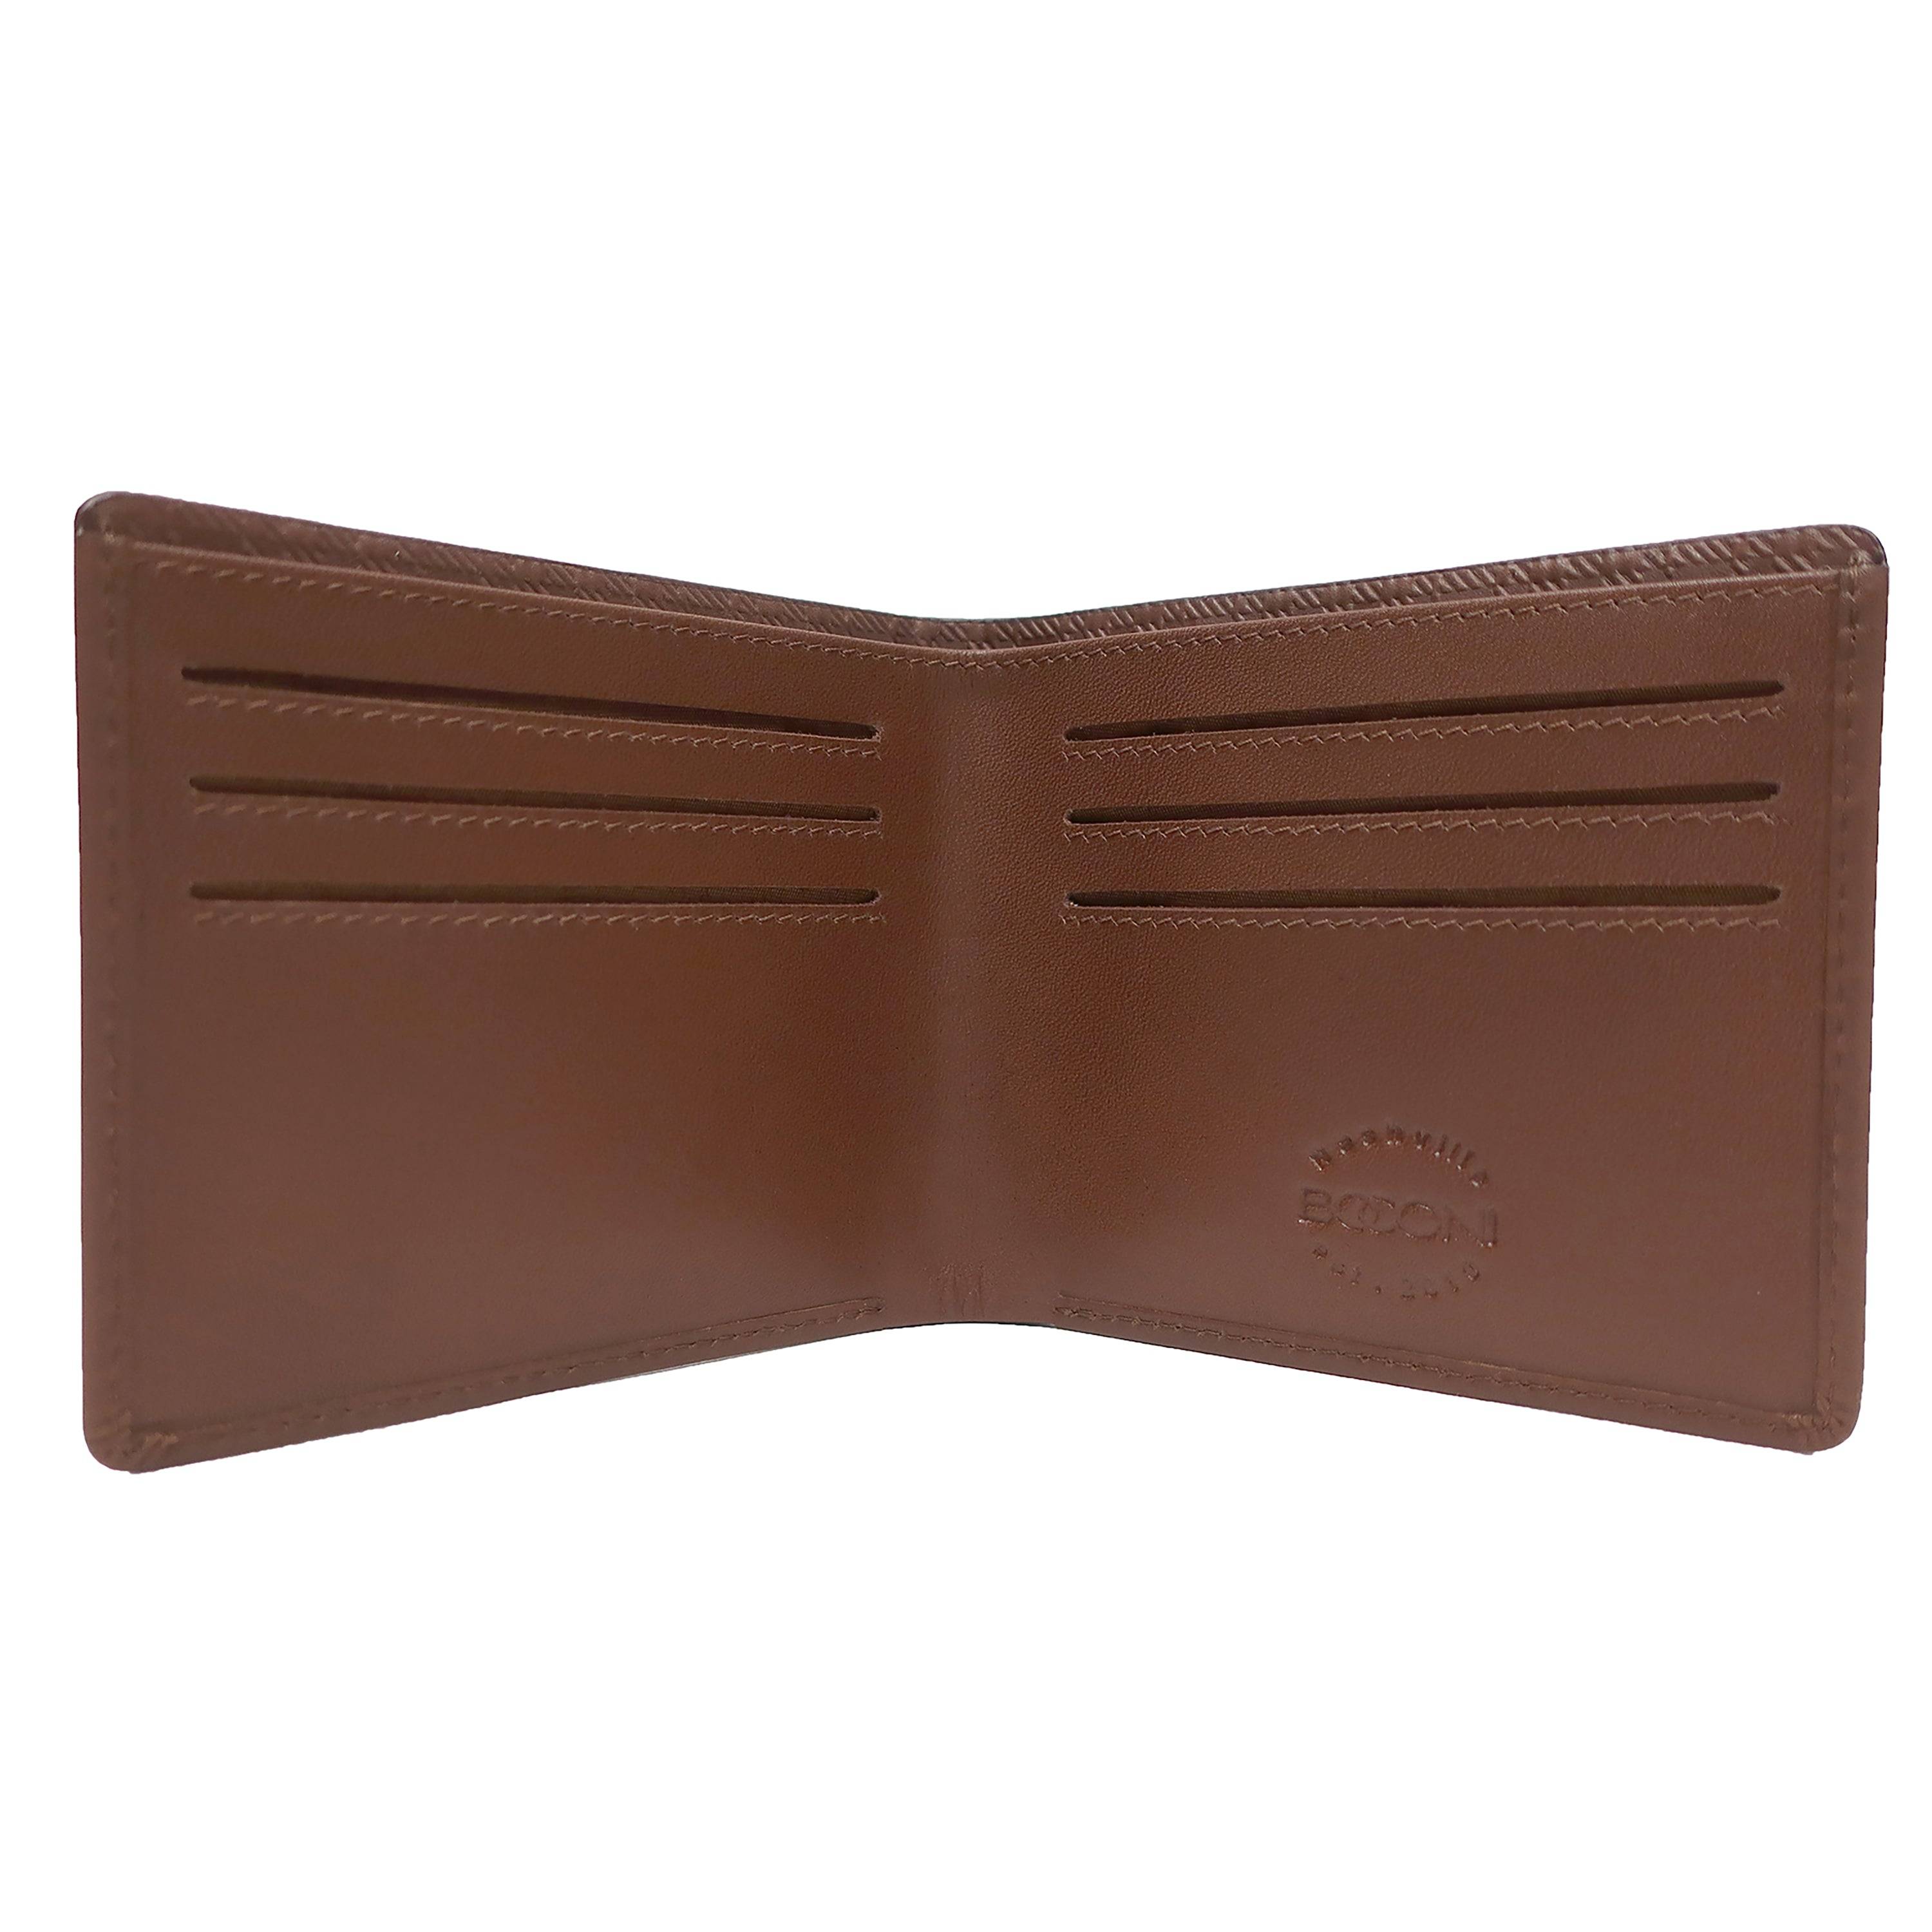 a brown leather wallet on a white background